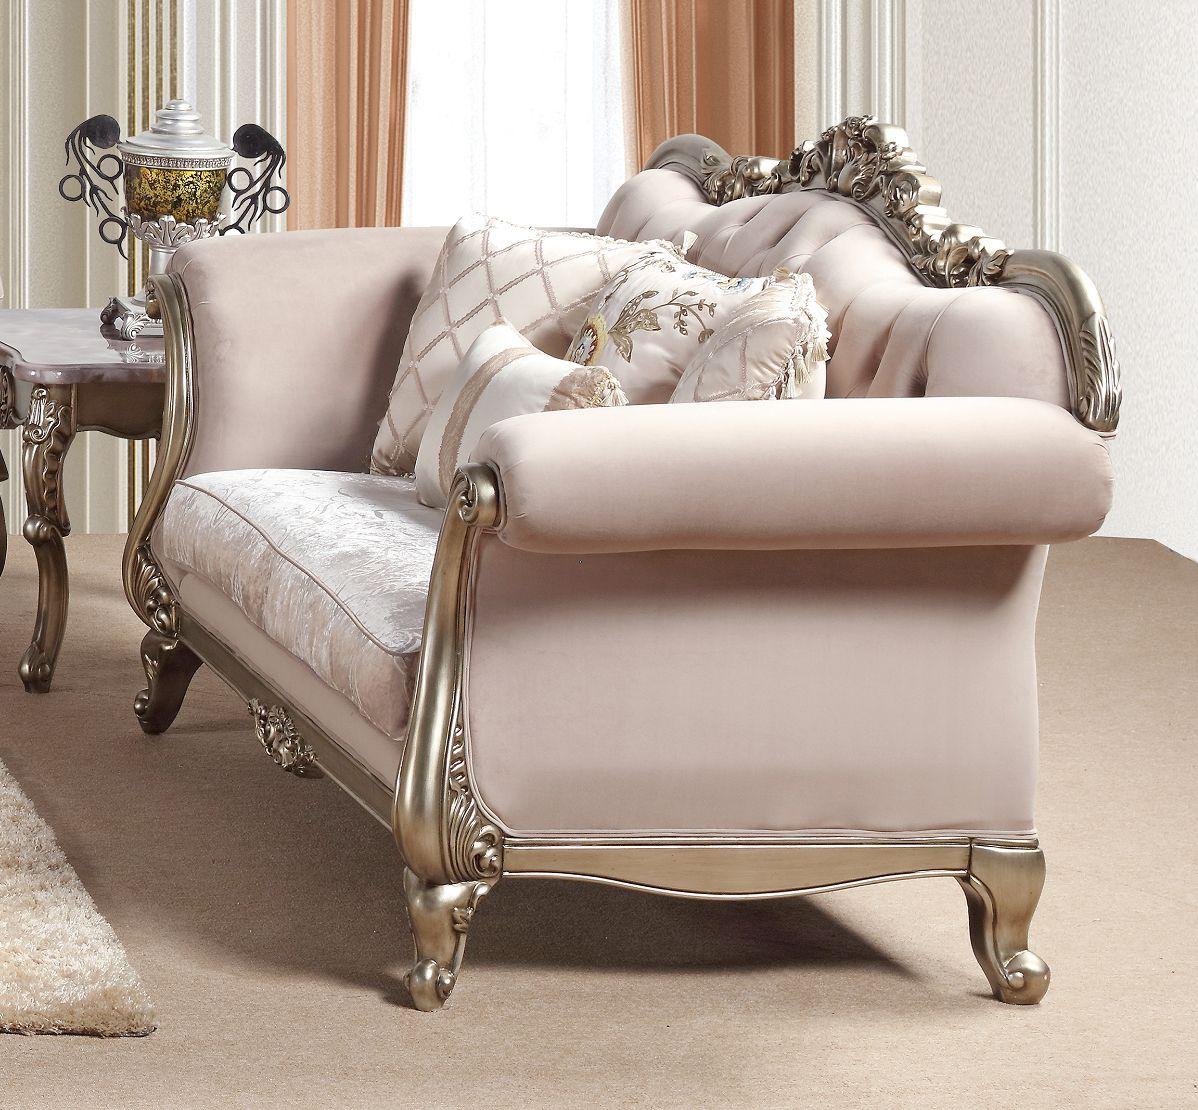 

        
Cosmos Furniture Ariana Sofa Loveseat and Chair Set Champagne Fabric 810053742396
